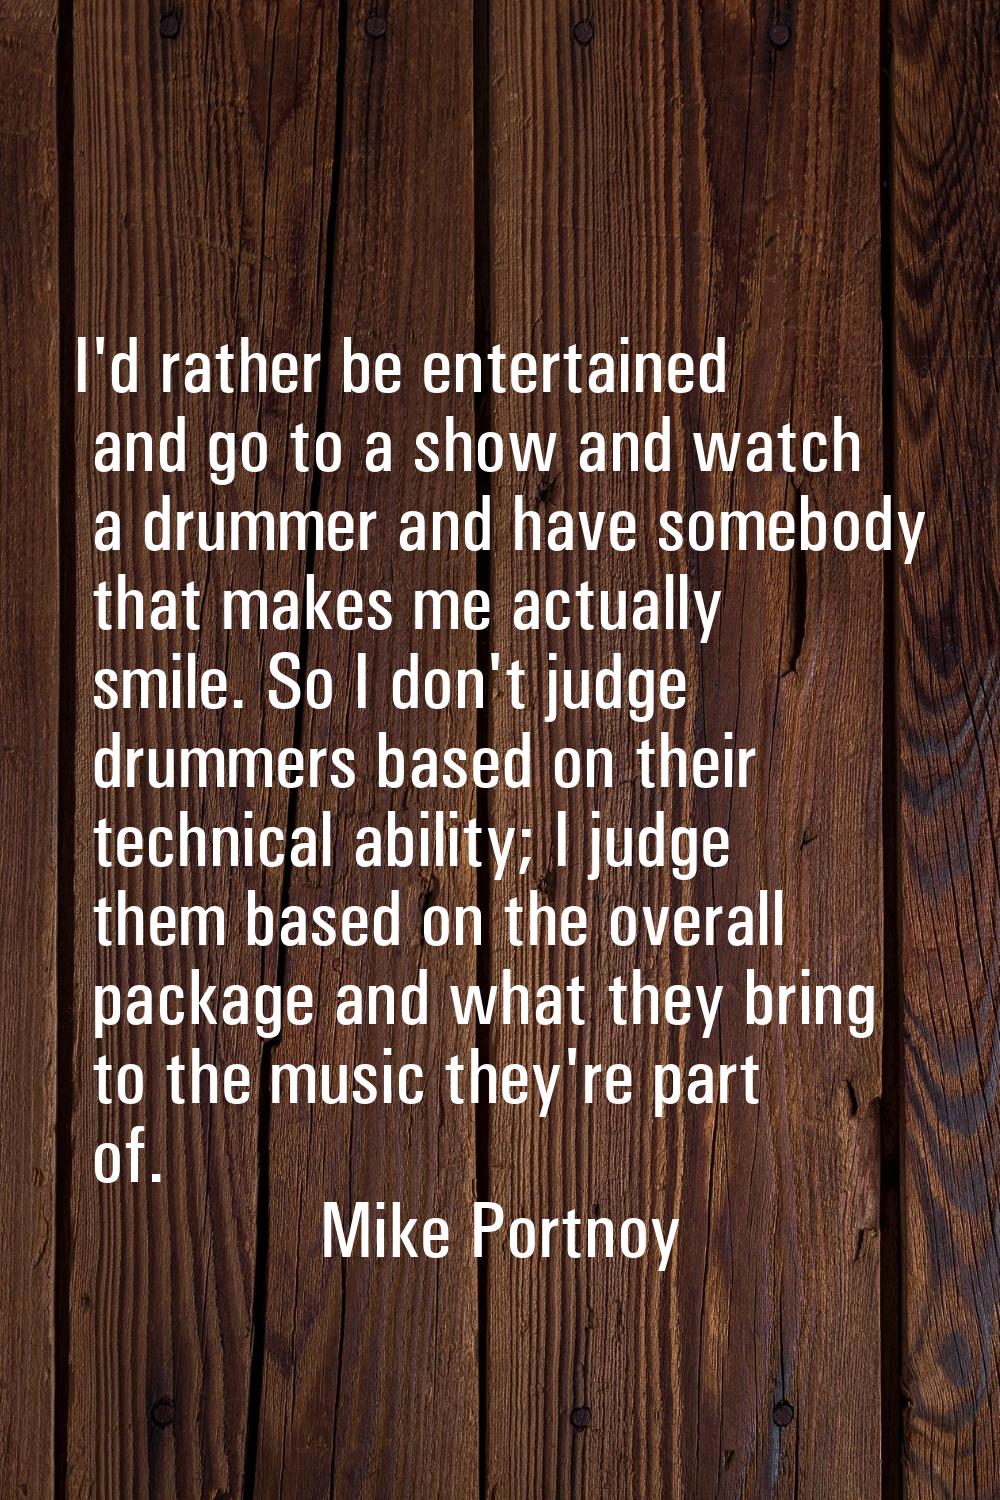 I'd rather be entertained and go to a show and watch a drummer and have somebody that makes me actu